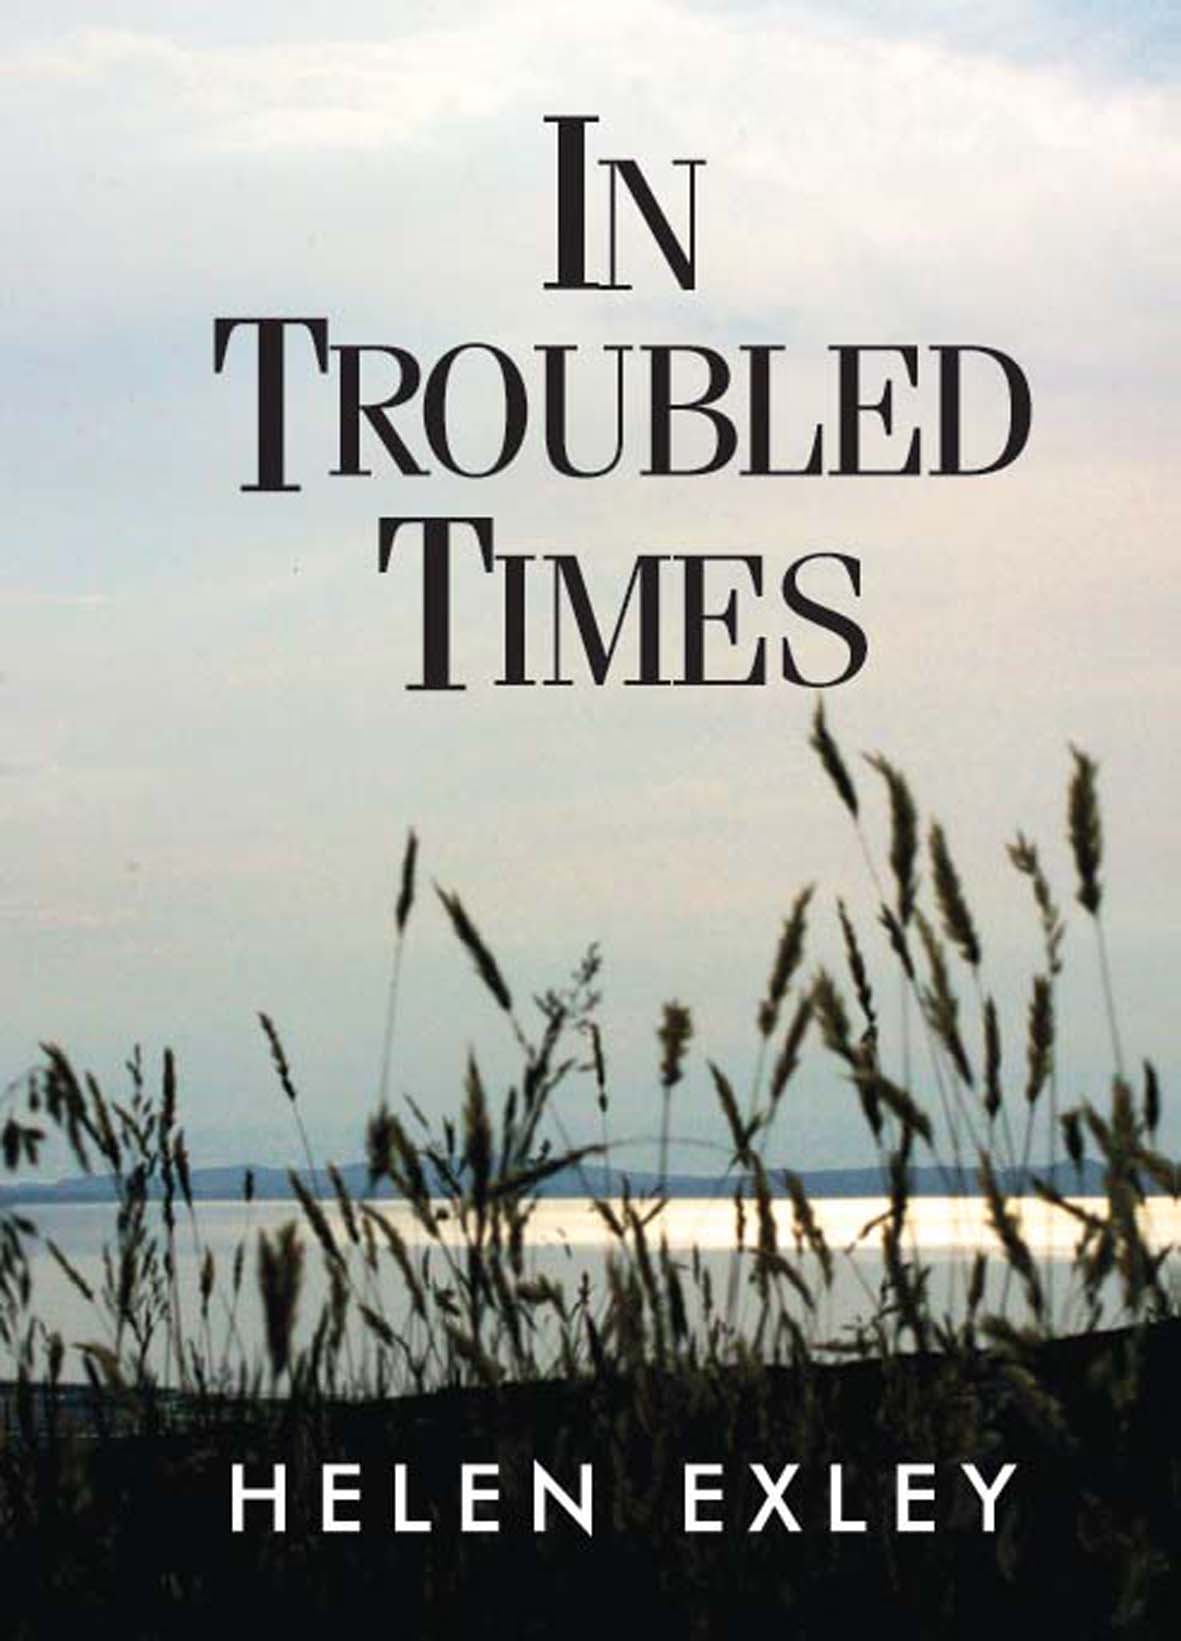 Little times перевод. Troubled times. Troubled.